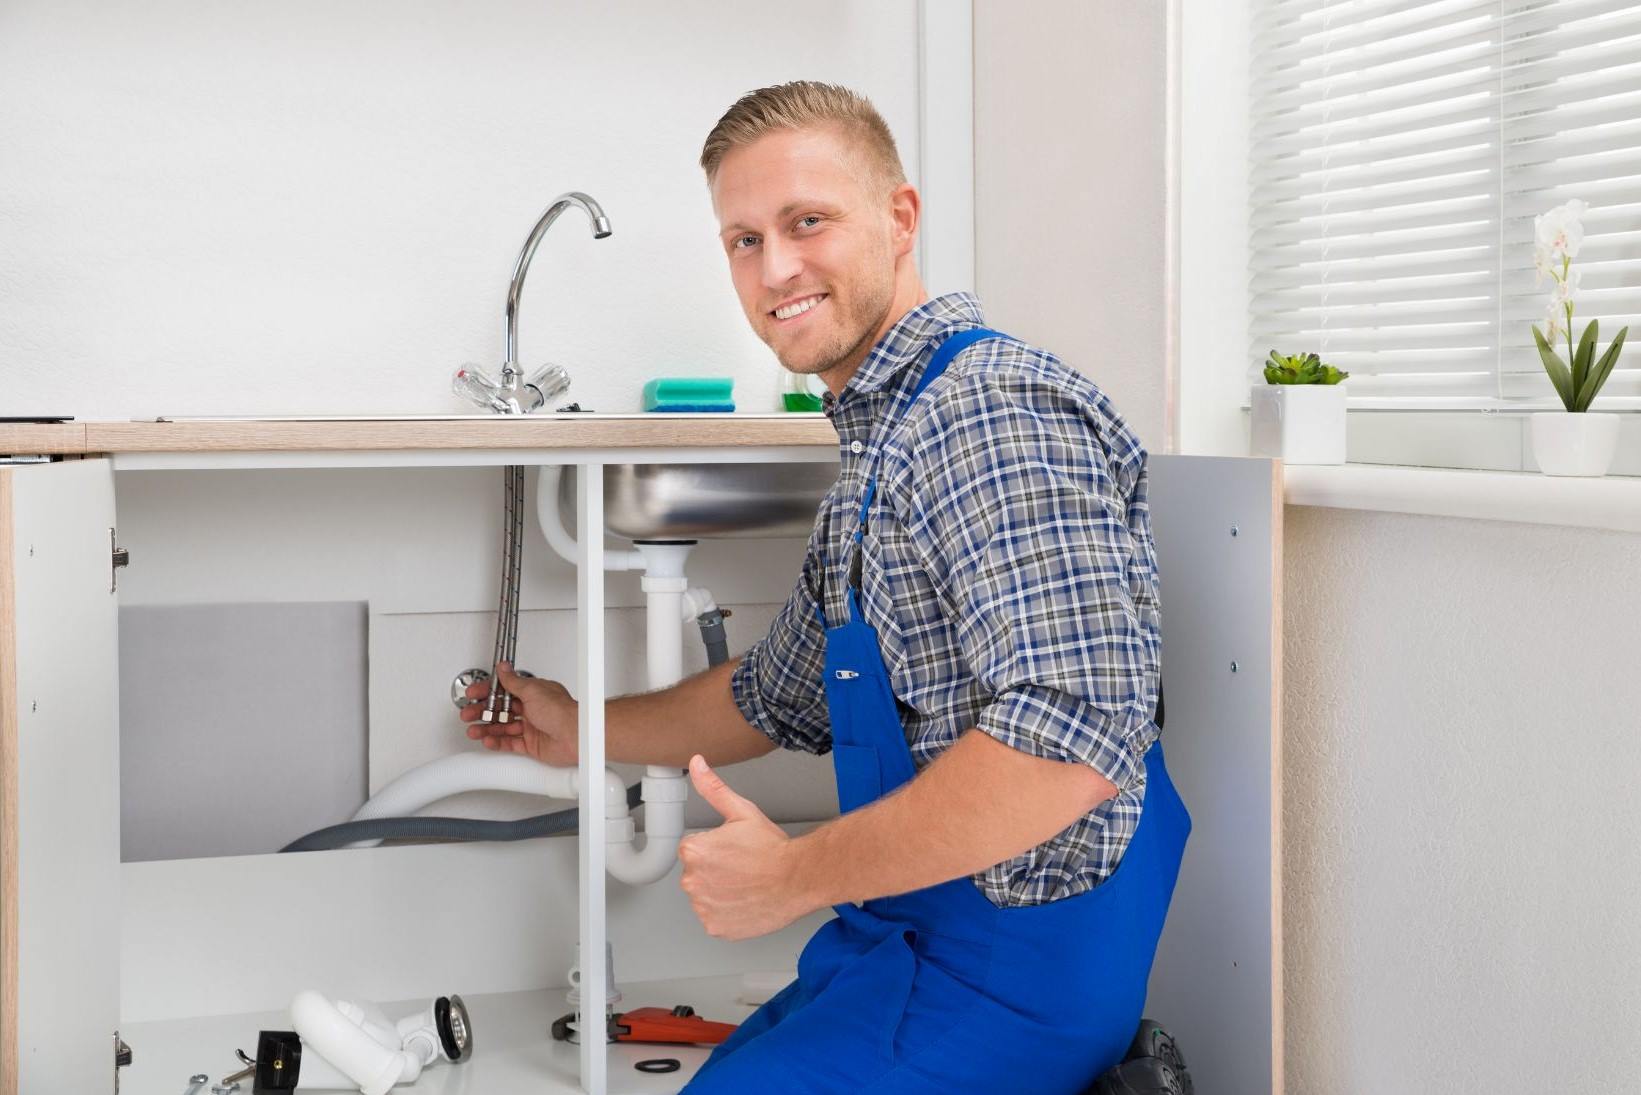 4 Steps to Install a Kitchen Sink Faucet